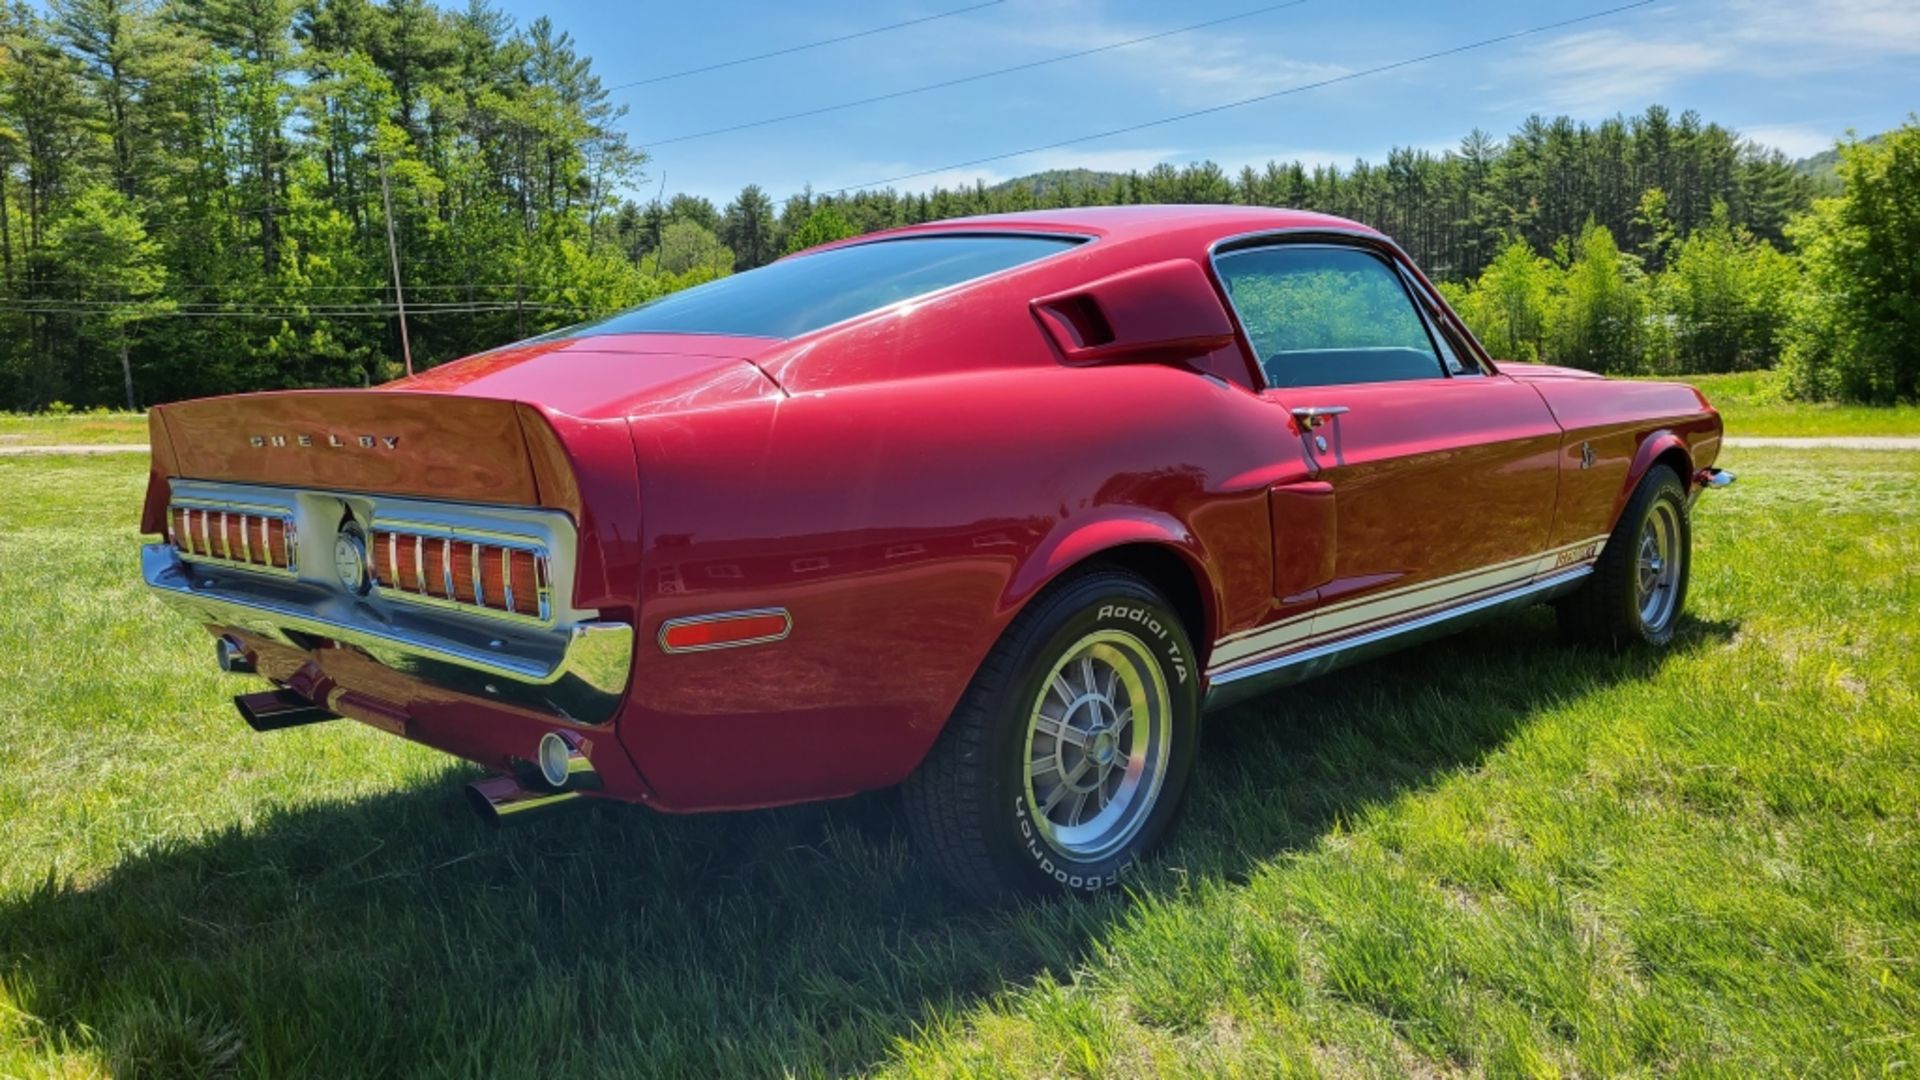 1968 Ford Mustang Gt500kr - Image 6 of 24